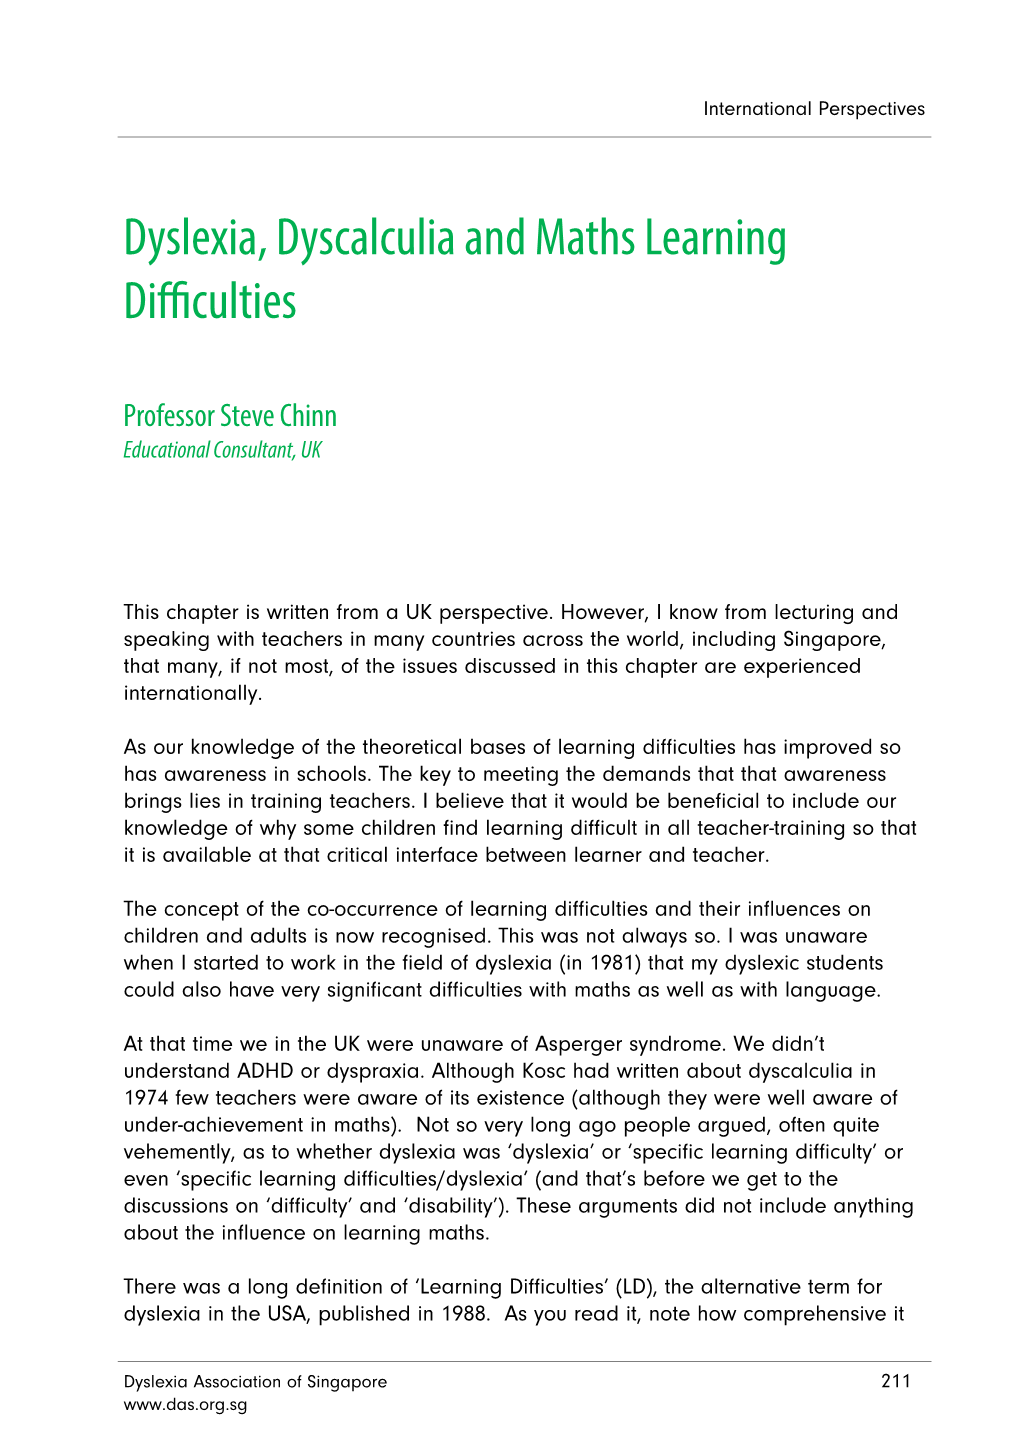 Dyslexia, Dyscalculia and Maths Learning Difficulties